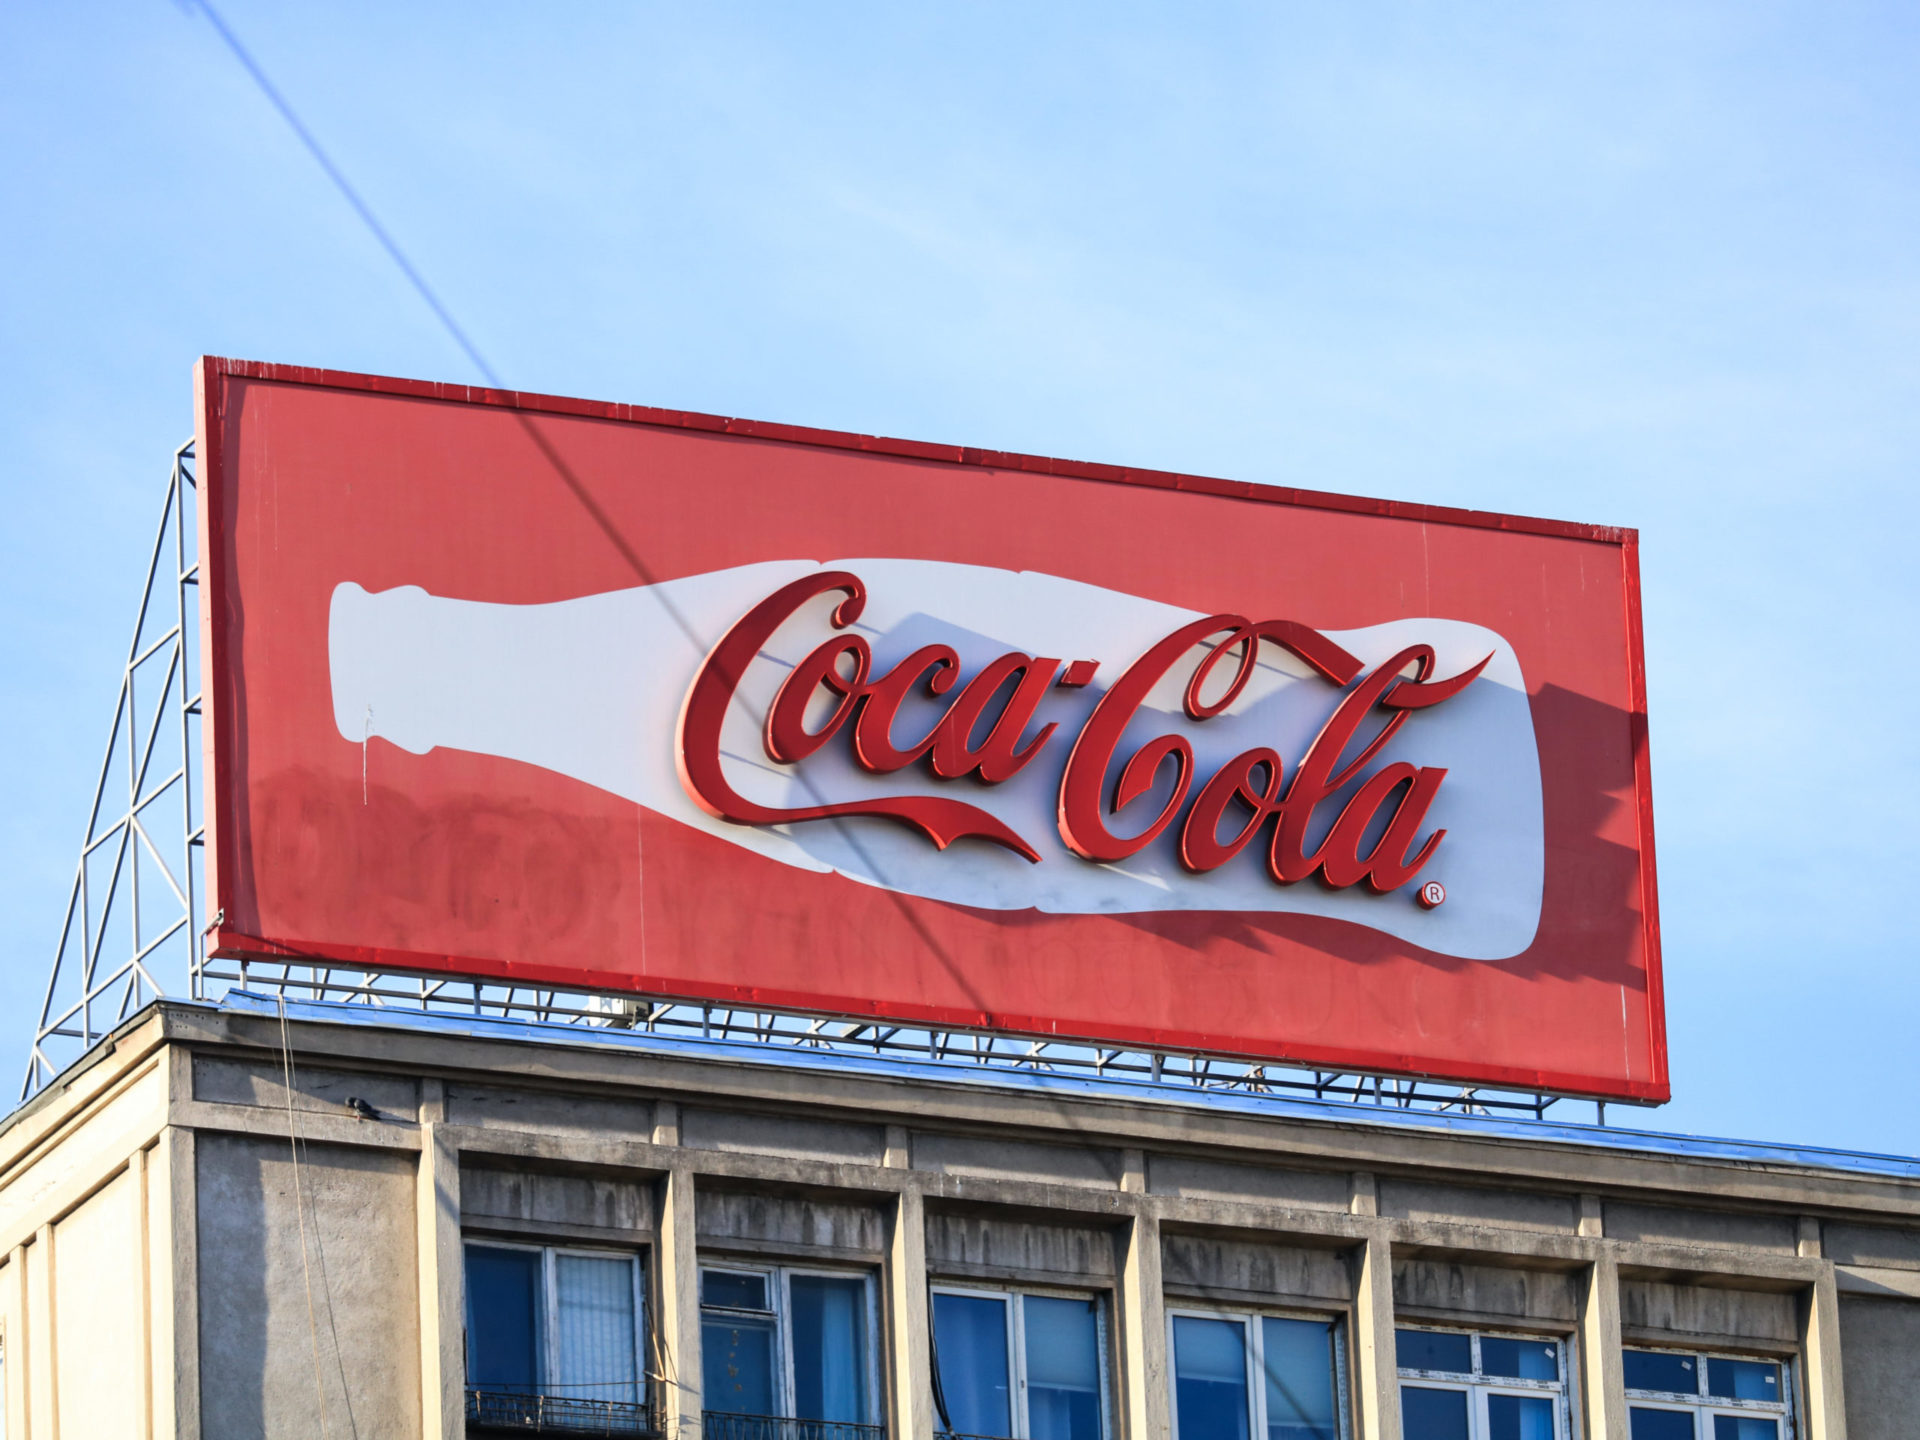 A billboard on top of a building wwith the CocaCola logo protruding out from a white silhouette of a coke bottle